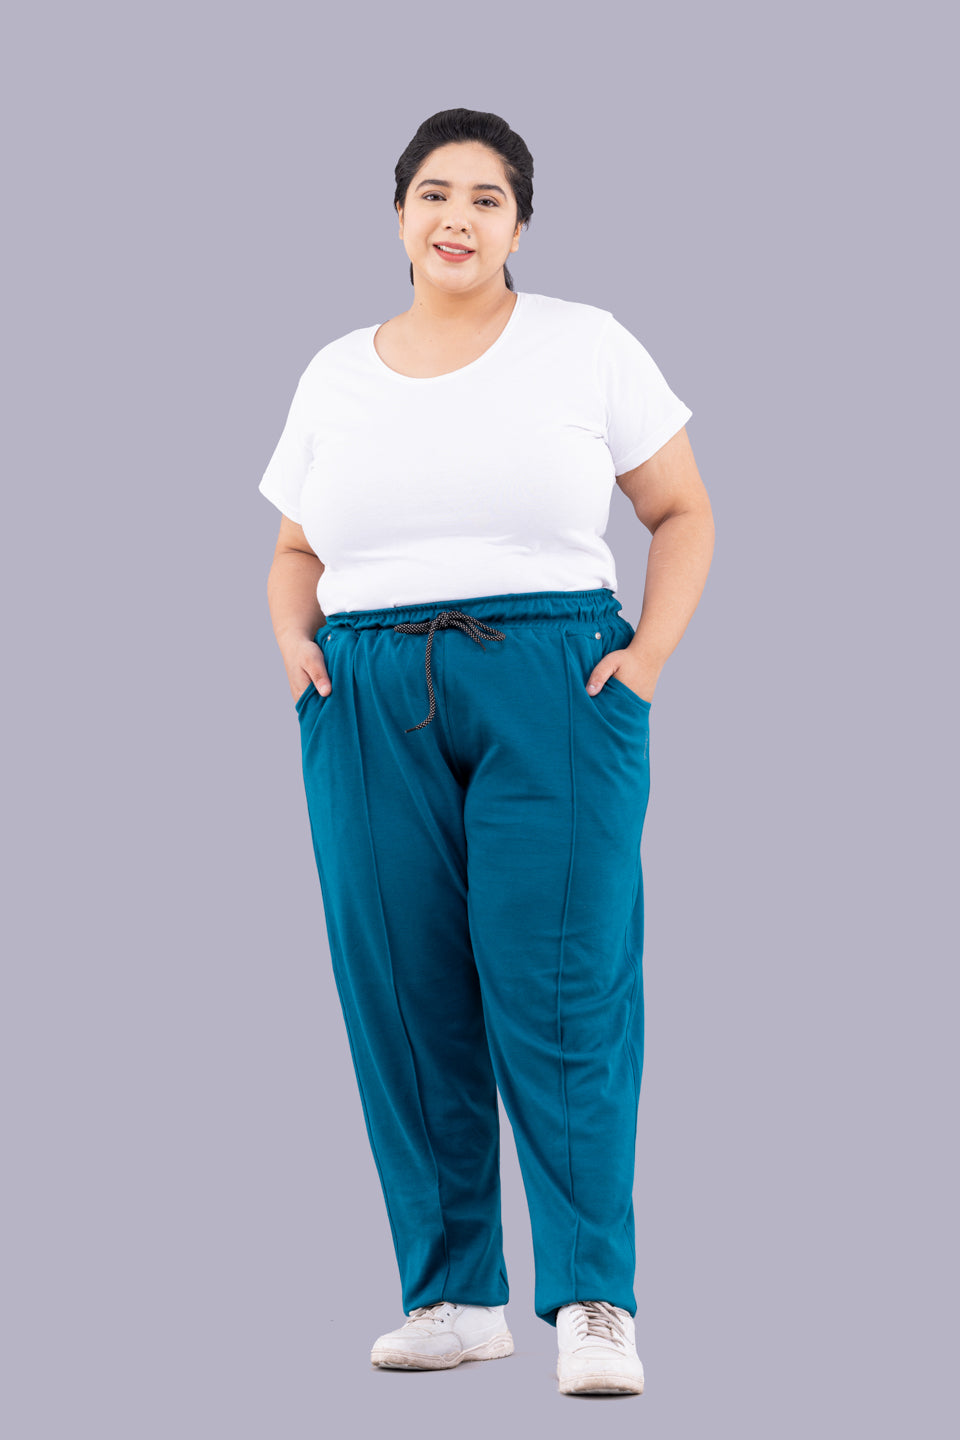 Comfy Teal Blue Relaxed Fit Cotton Trackpants for Women online in India at best prices